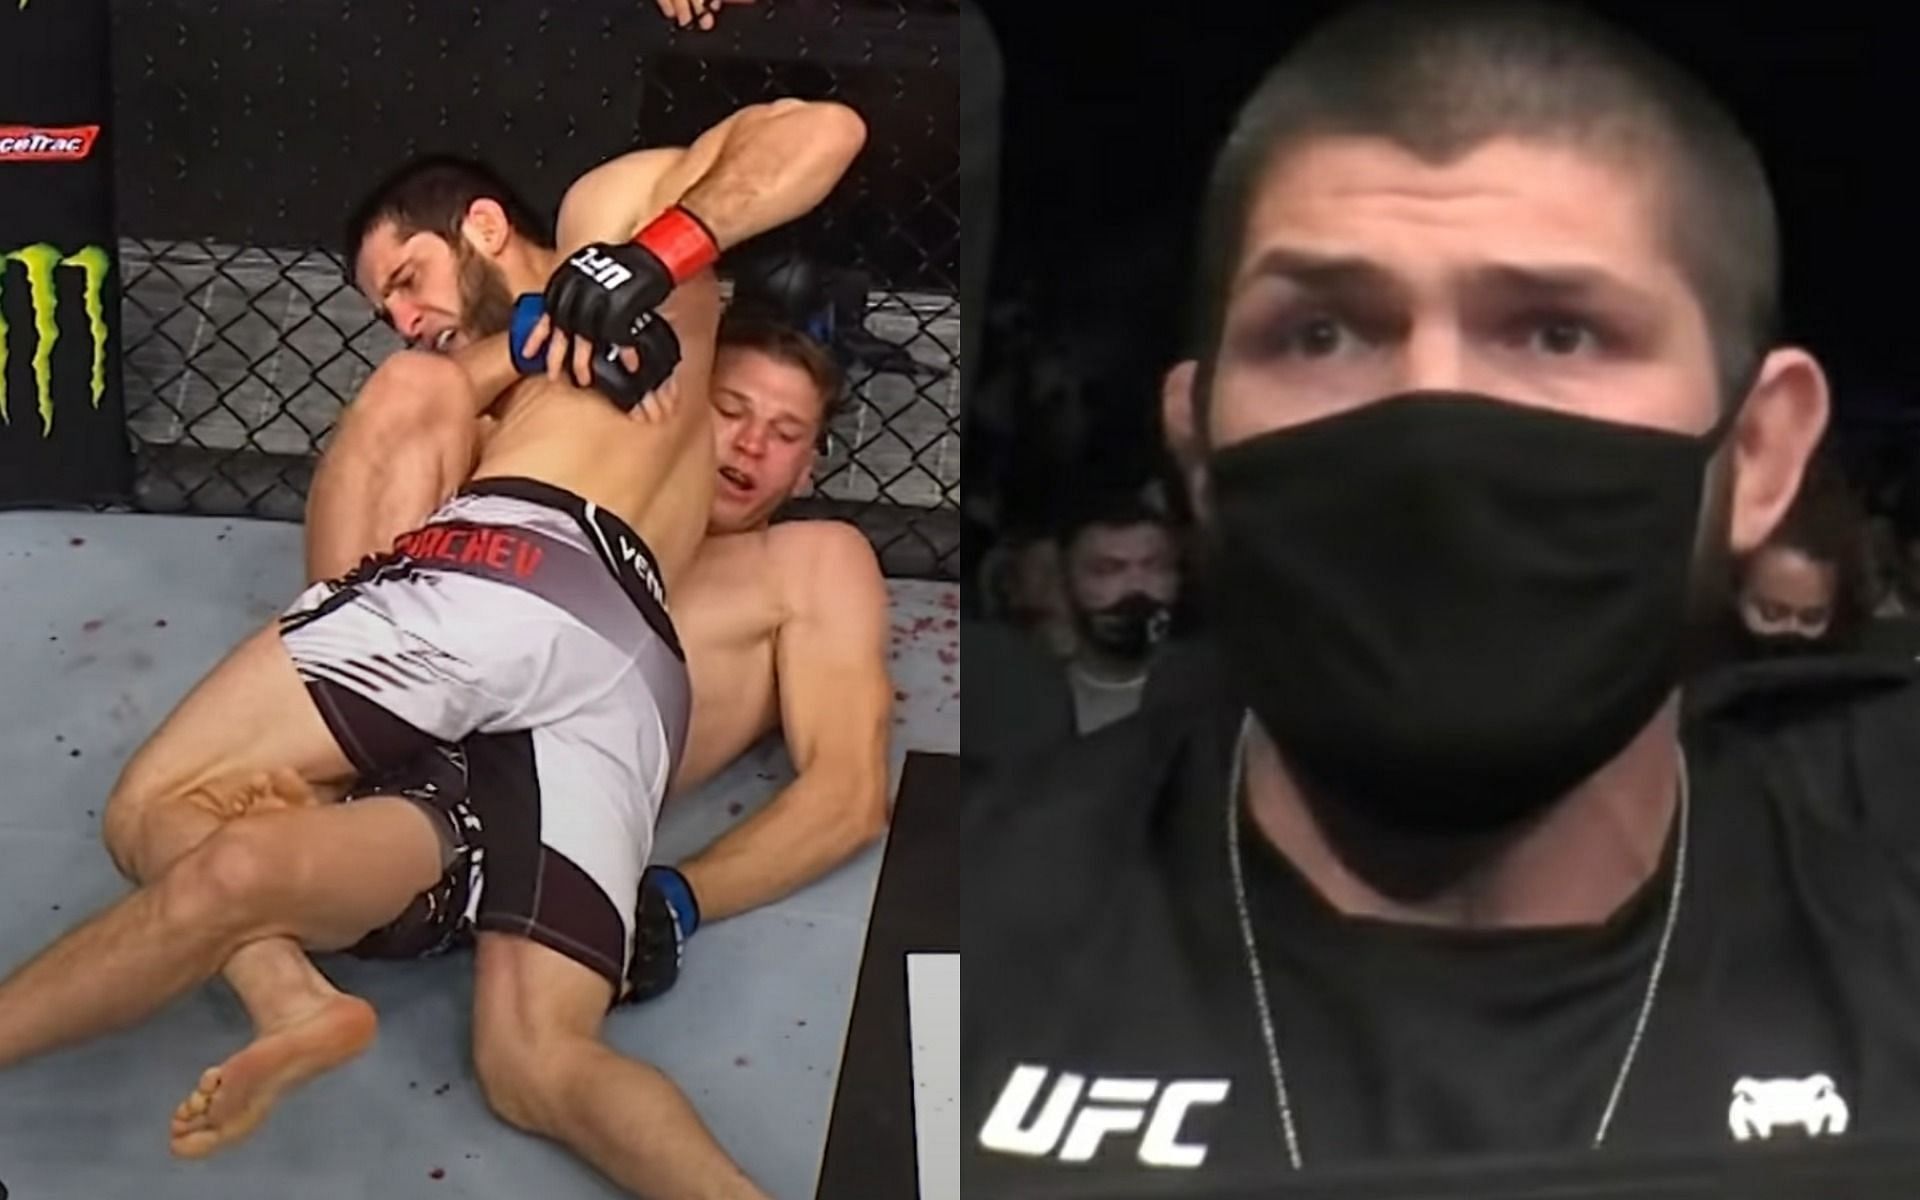 Makhachev in action against Hooker inside the octagon (left) as Khabib watches on from the outside (right) [Image Credit: via @ufc on Instagram]